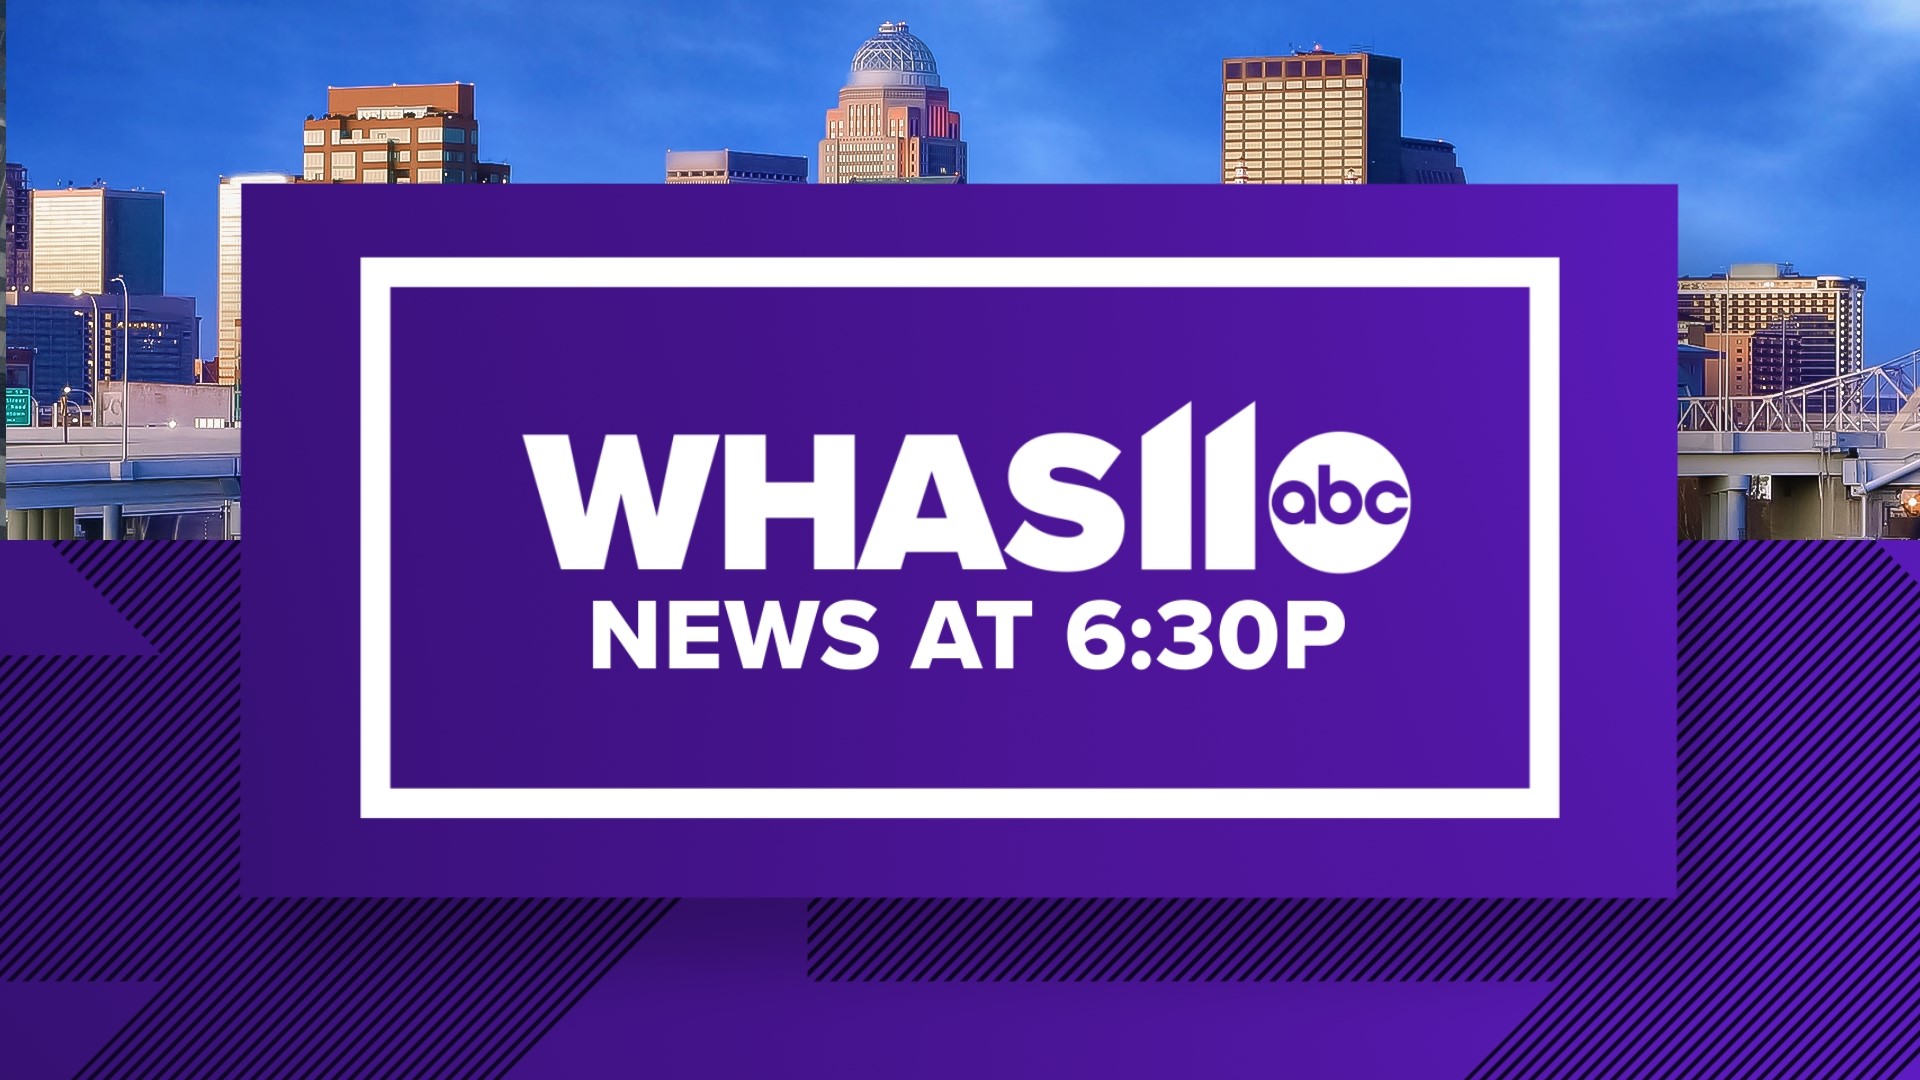 The latest local, regional and national news events are presented by the WHAS11 News Team, along with updated sports, weather and traffic.